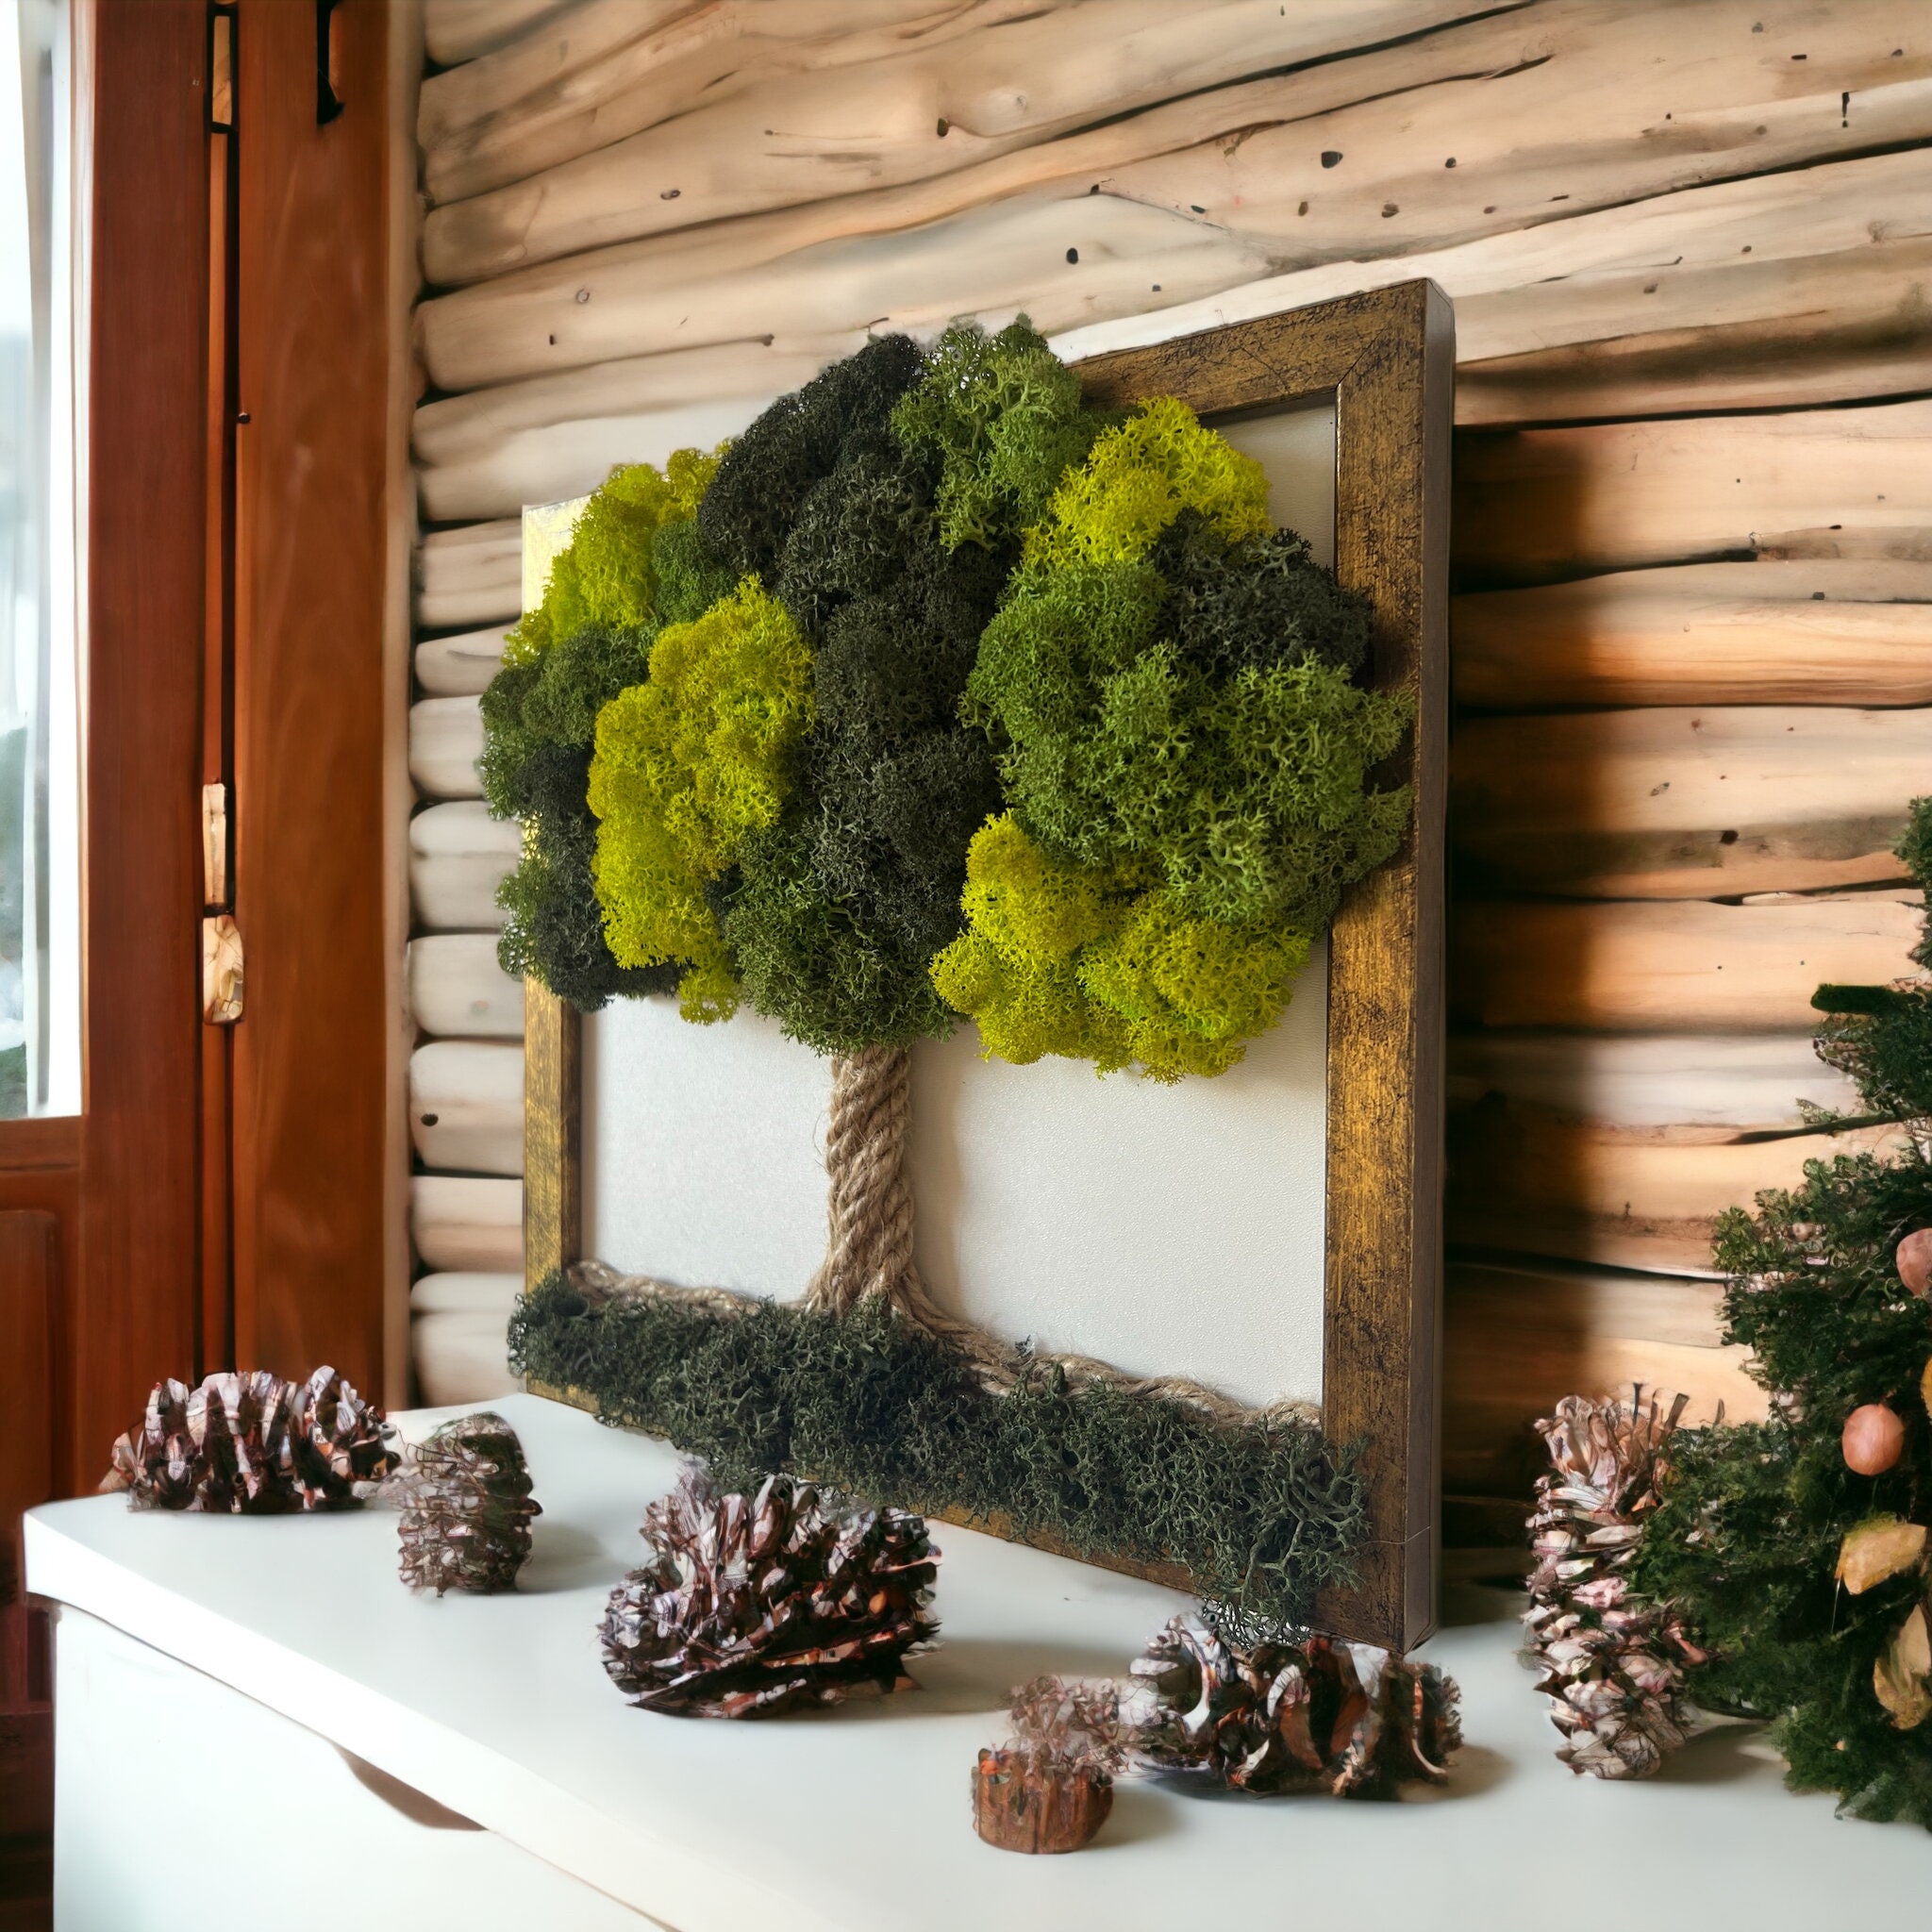 Decorating with Moss Green - Sincerely, Sara D.